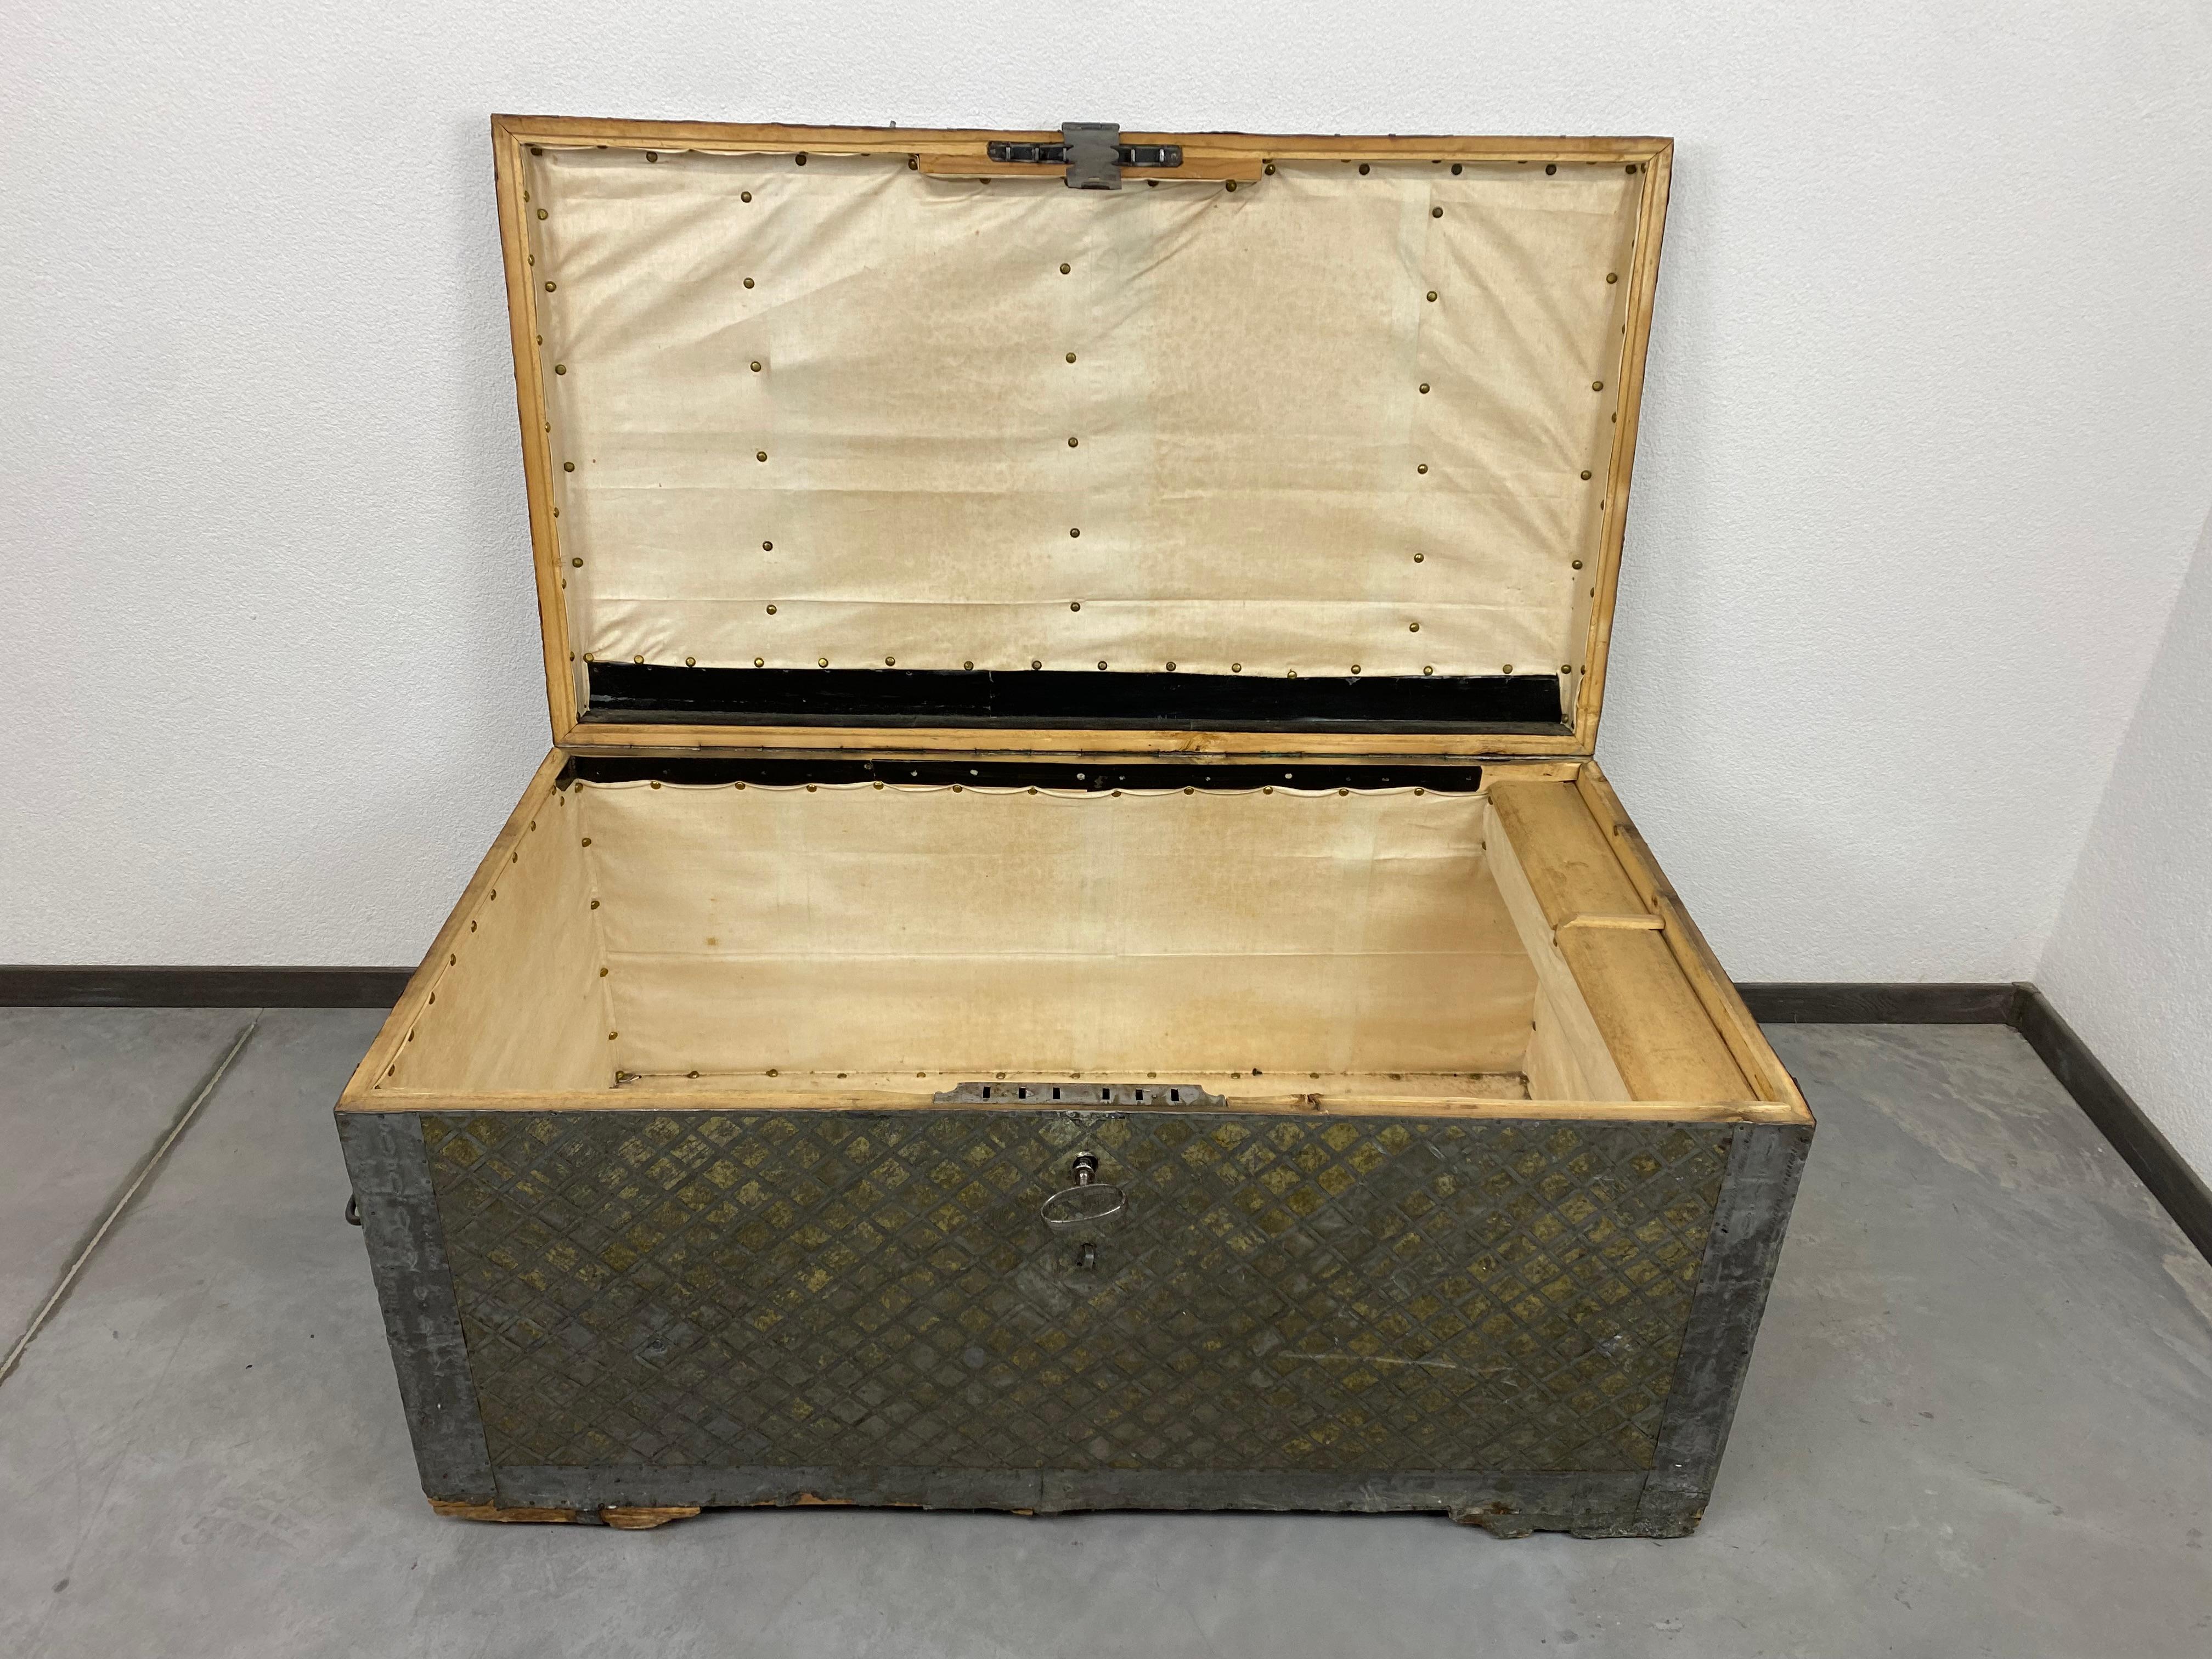 18th century antique travel chest. Solid wood with tin cladding. Baroque lock fully functional with original key.